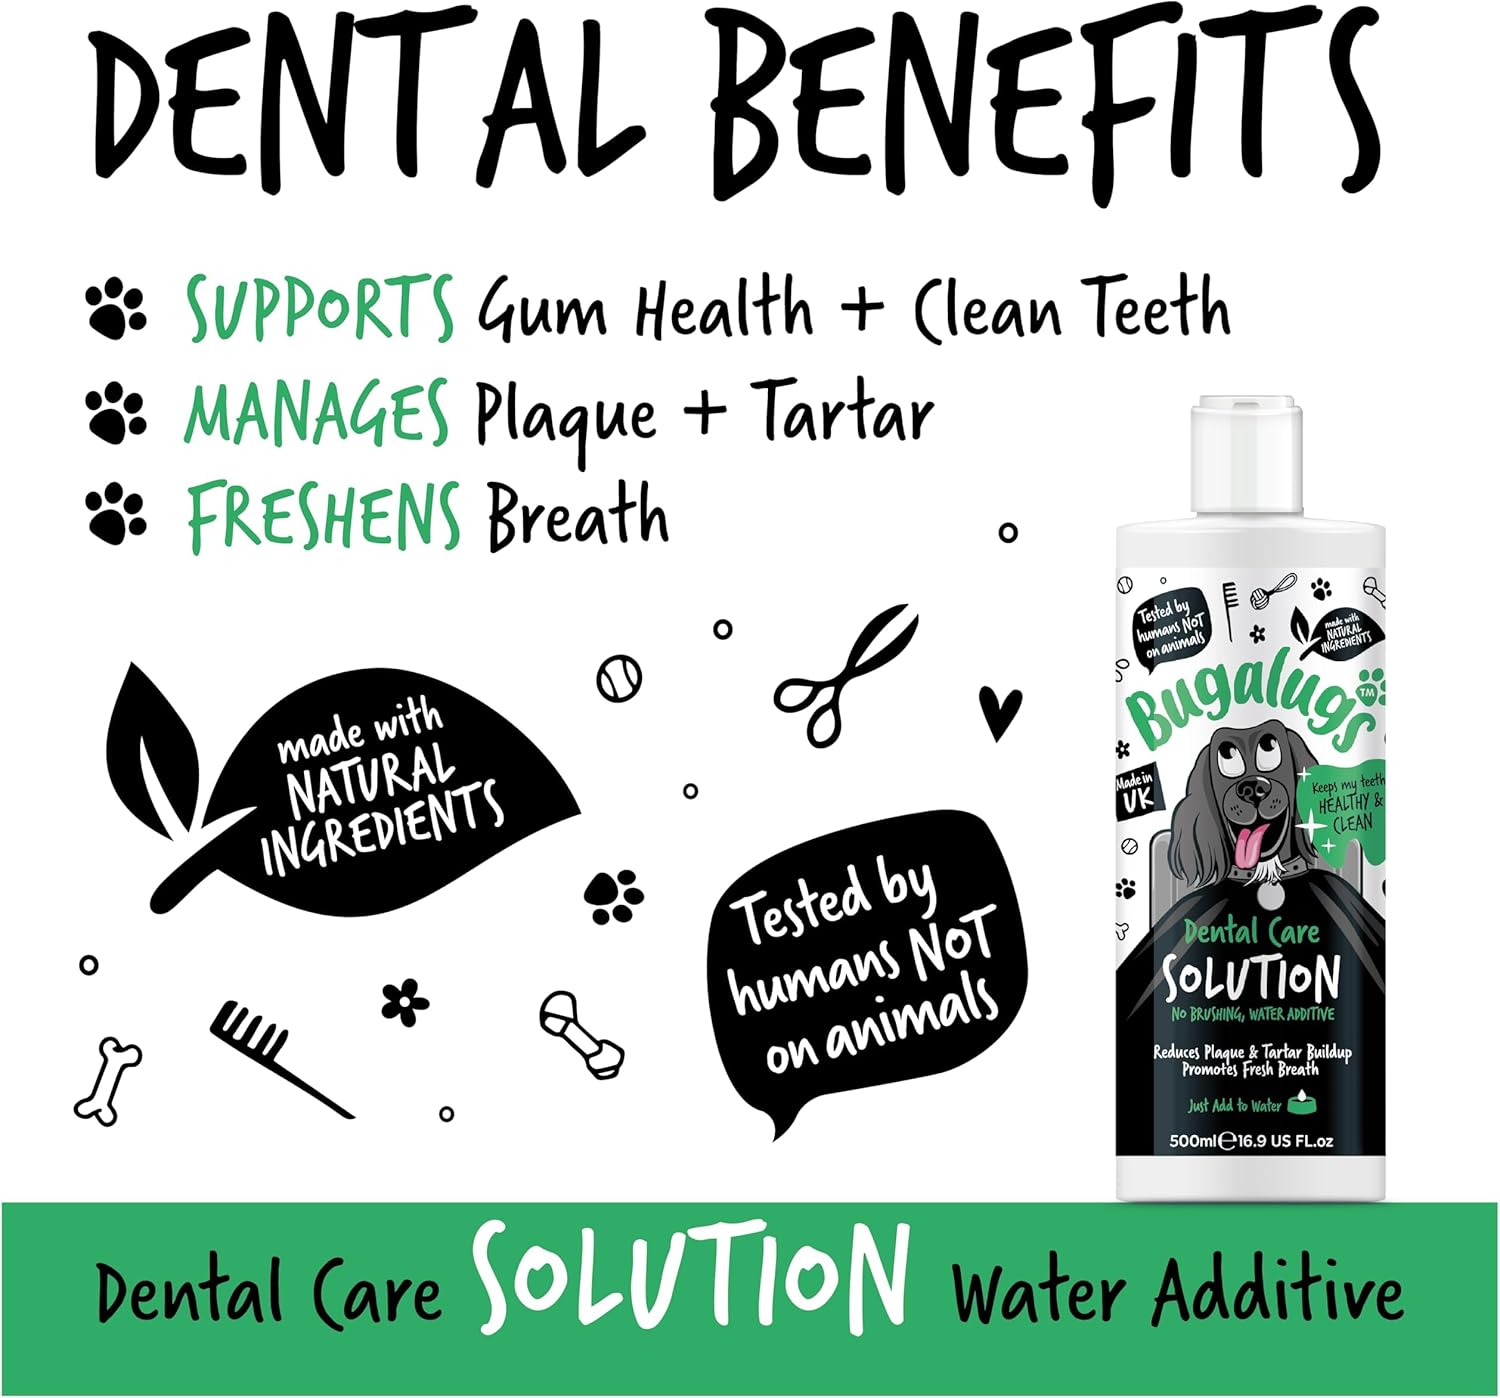 BUGALUGS Dog Breath Freshener Dental Care Water Additive. Clean Teeth, Healthy Gums & Fresh Breath - Natural Dog plaque remover & tartar remover for teeth - No Brushing Needed :Pet Supplies